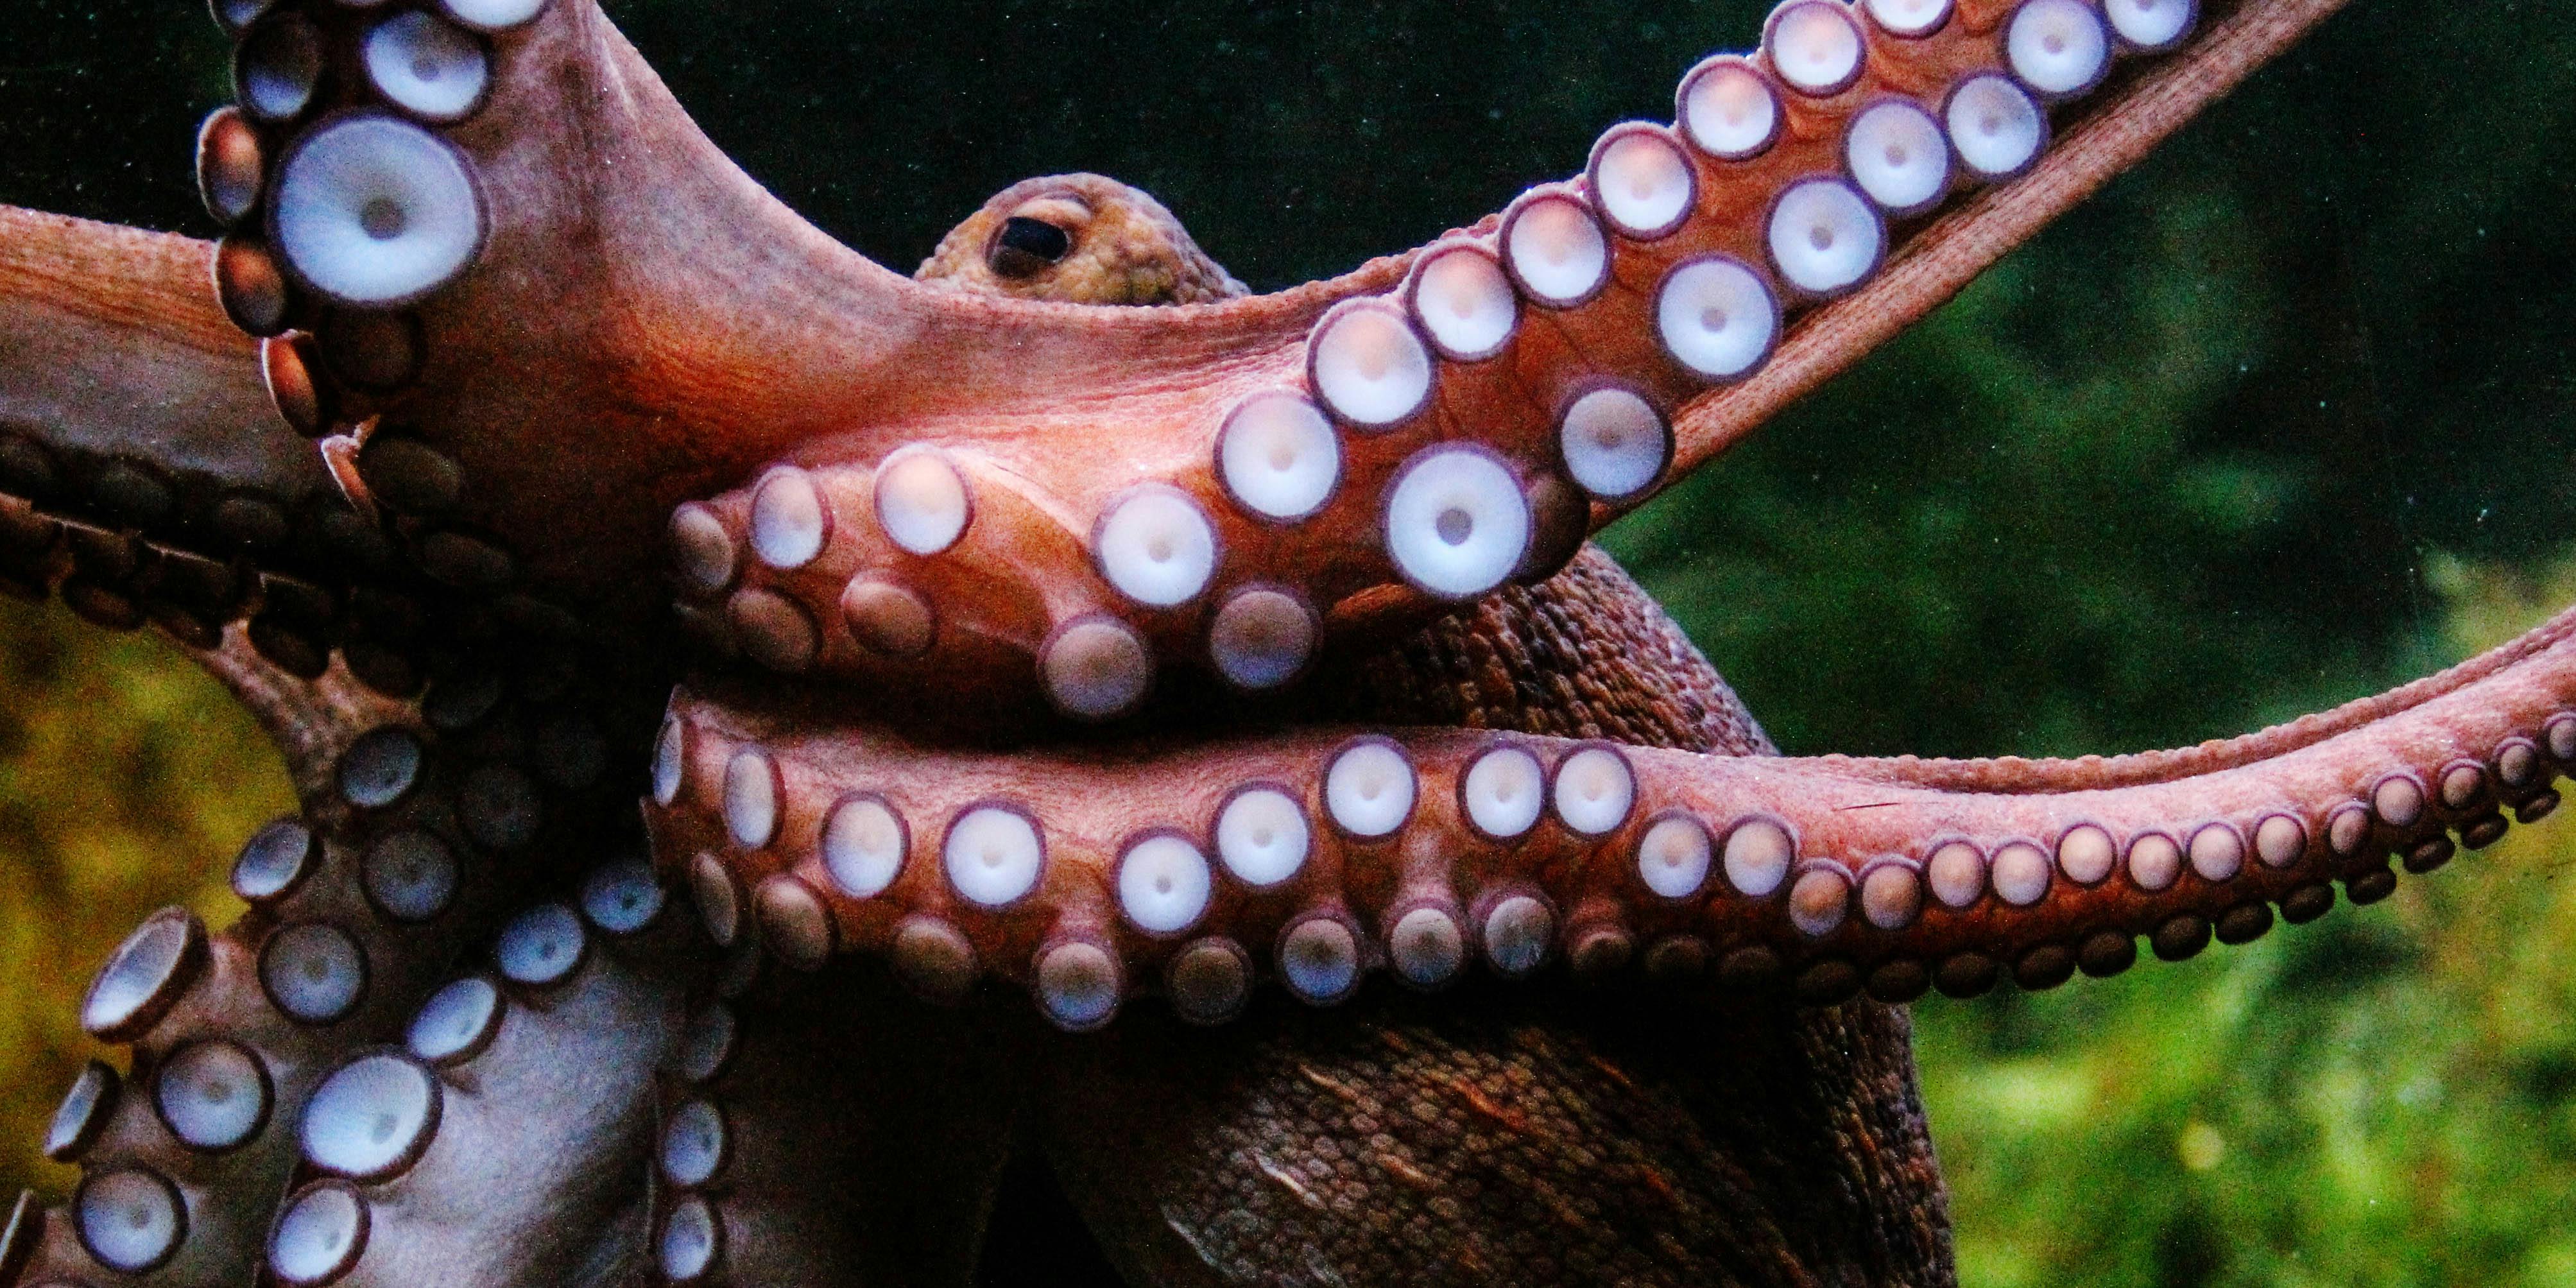 A close up of octopi tentacles. The Vancouver Aquarium just named their newest octopus after Seth Rogen.